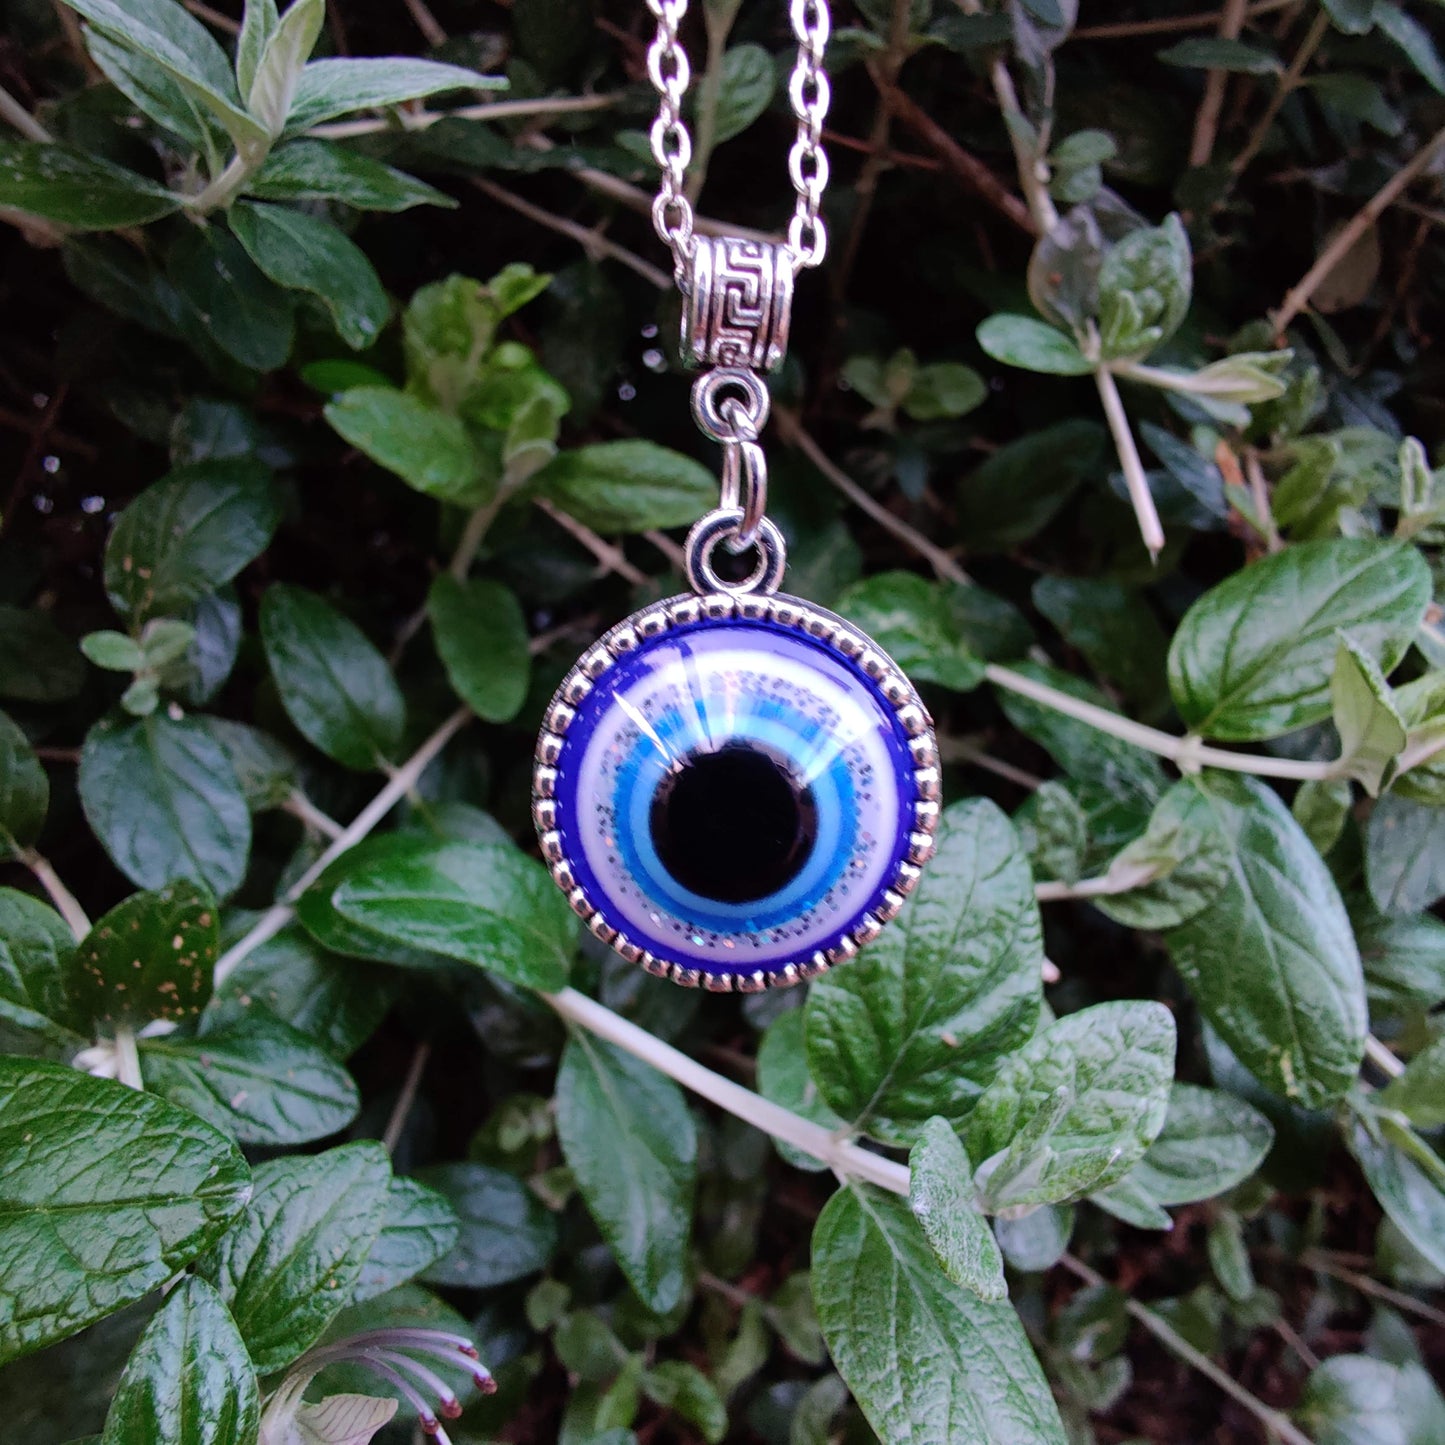 Large Evil Eye Pendant with Silver Chain - Rivendell Shop